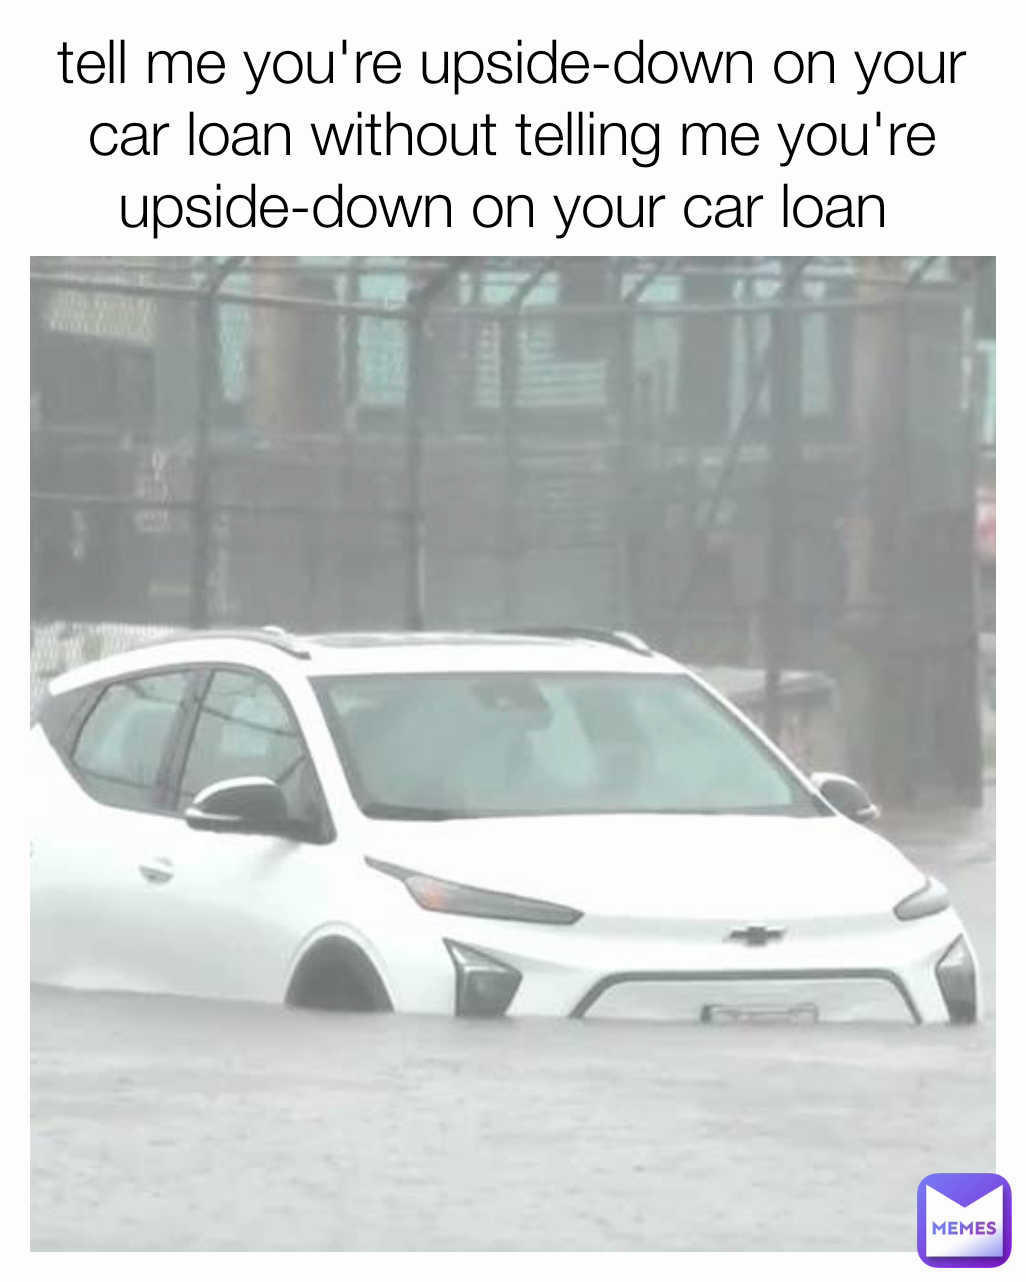 tell me you're upside-down on your car loan without telling me you're upside-down on your car loan 